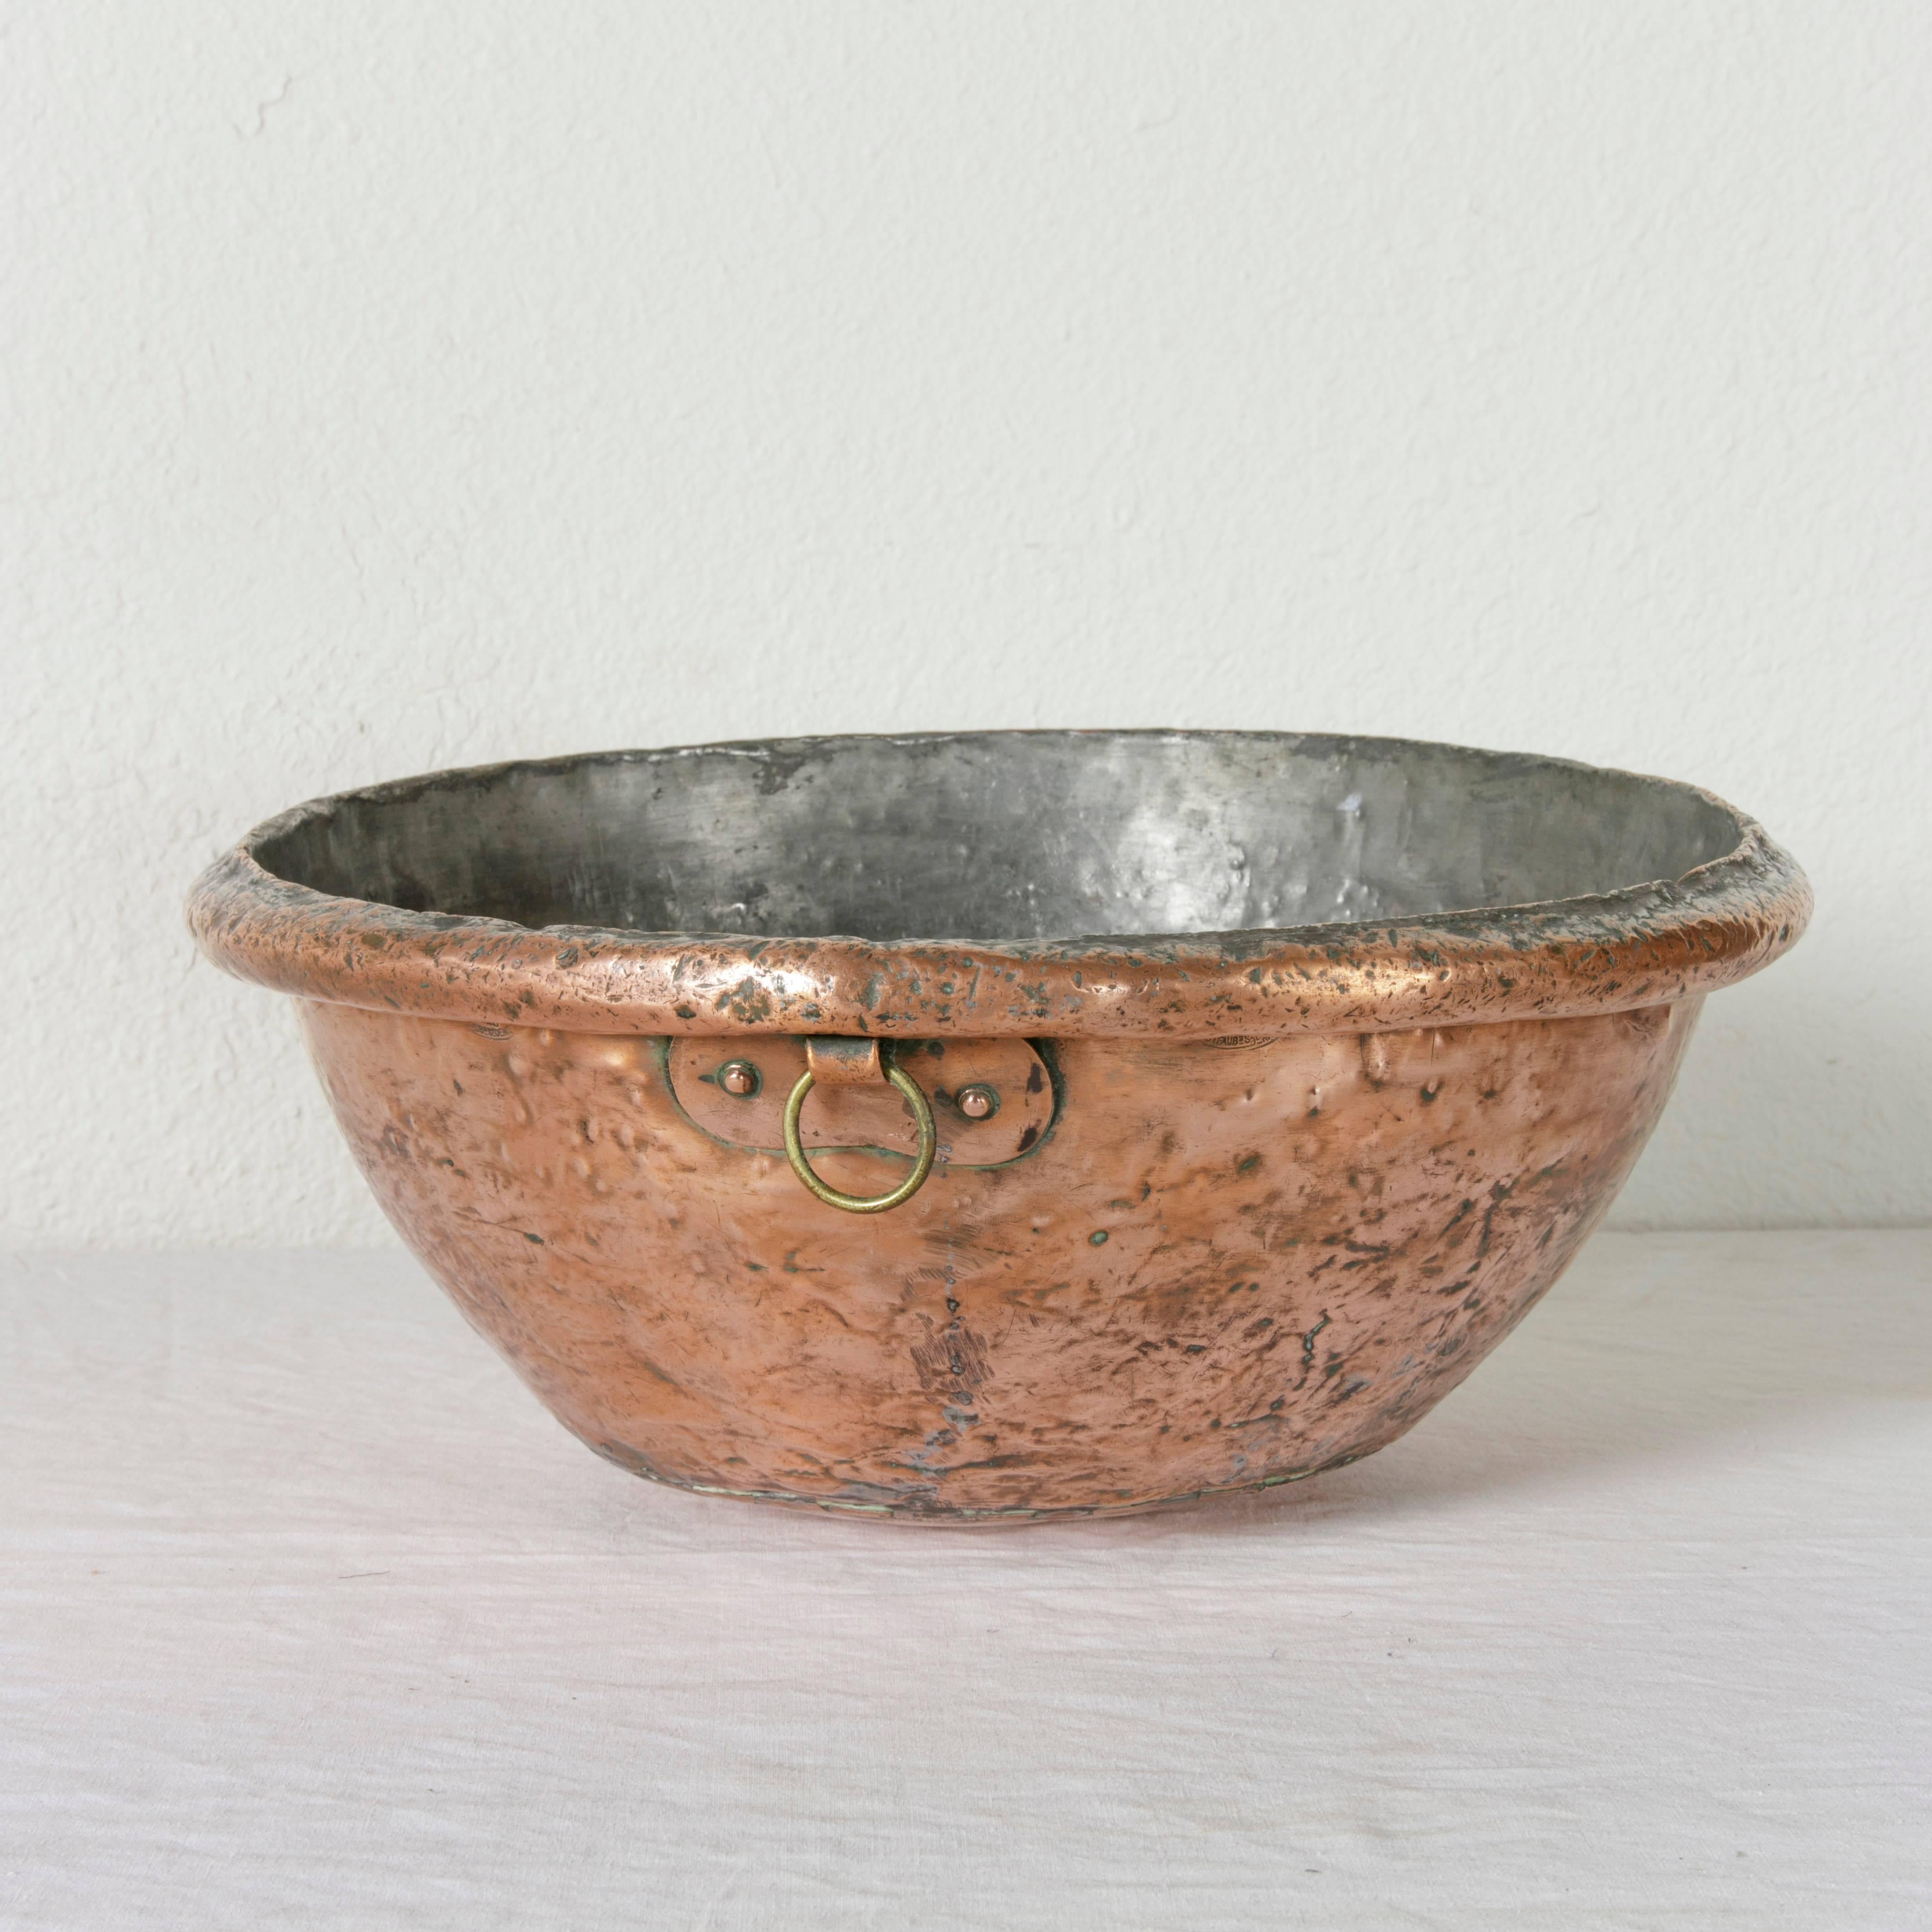 18th Century French Hand-Hammered Copper Mixing Bowl with Iron Ring for Hanging 2